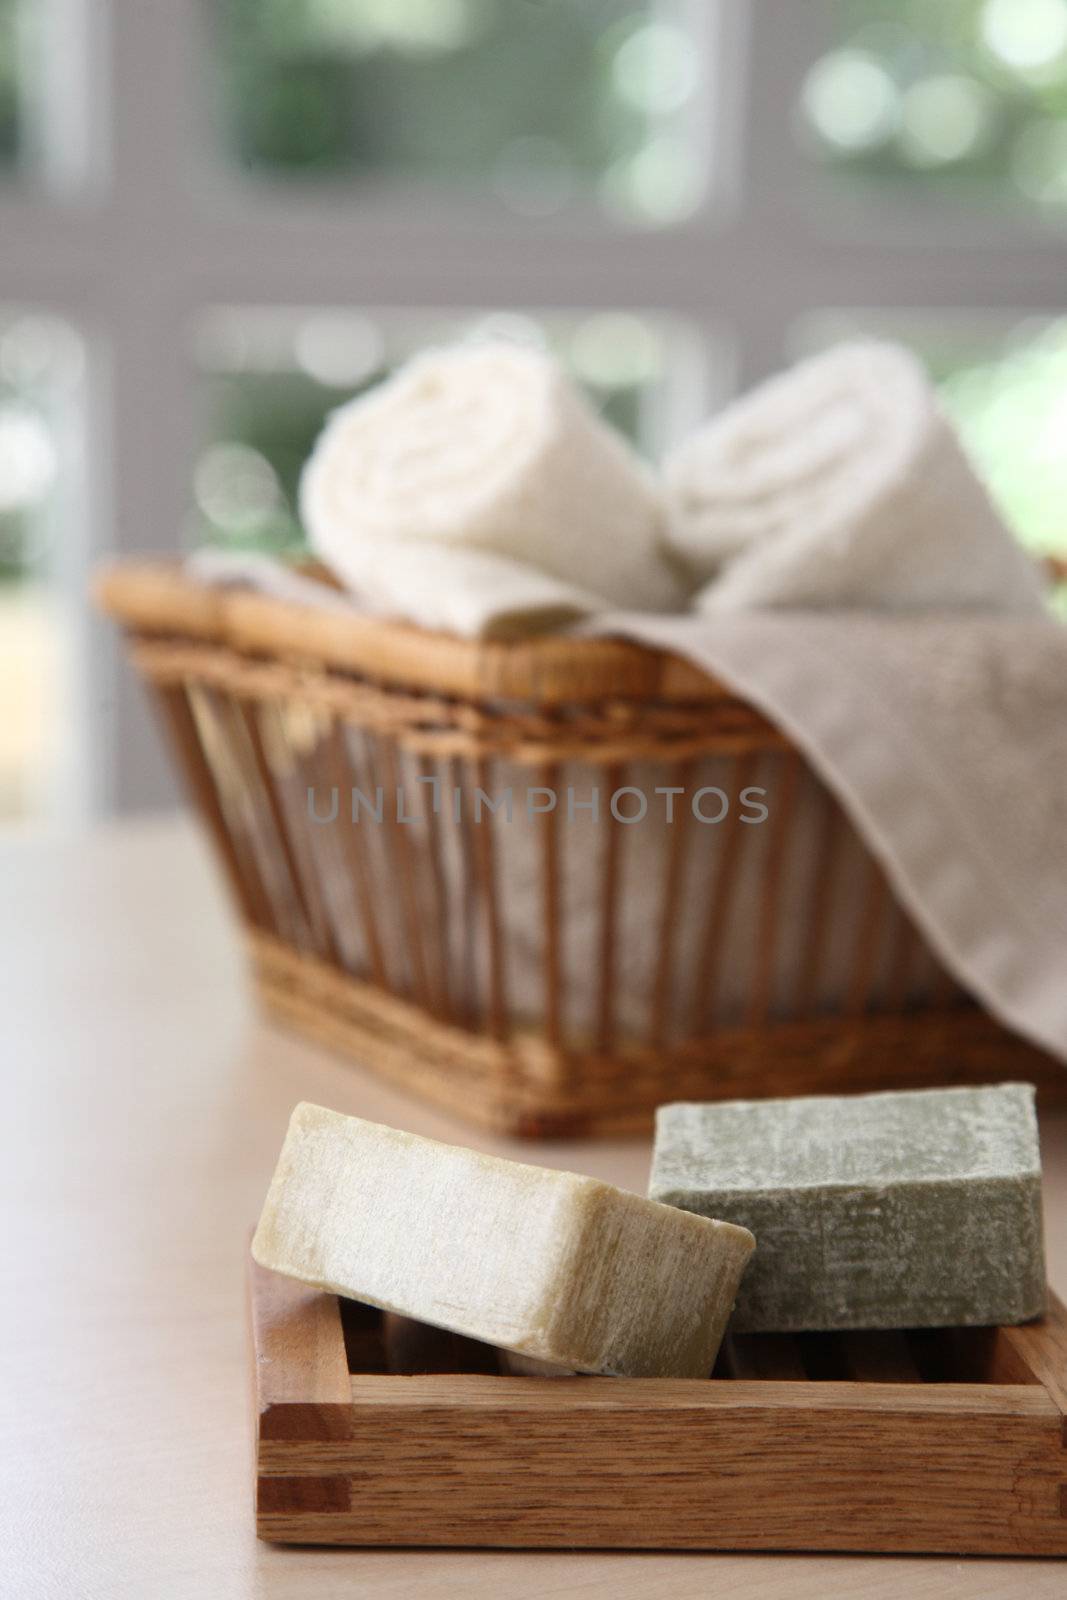 Soaps,towels and basket with a blurred background